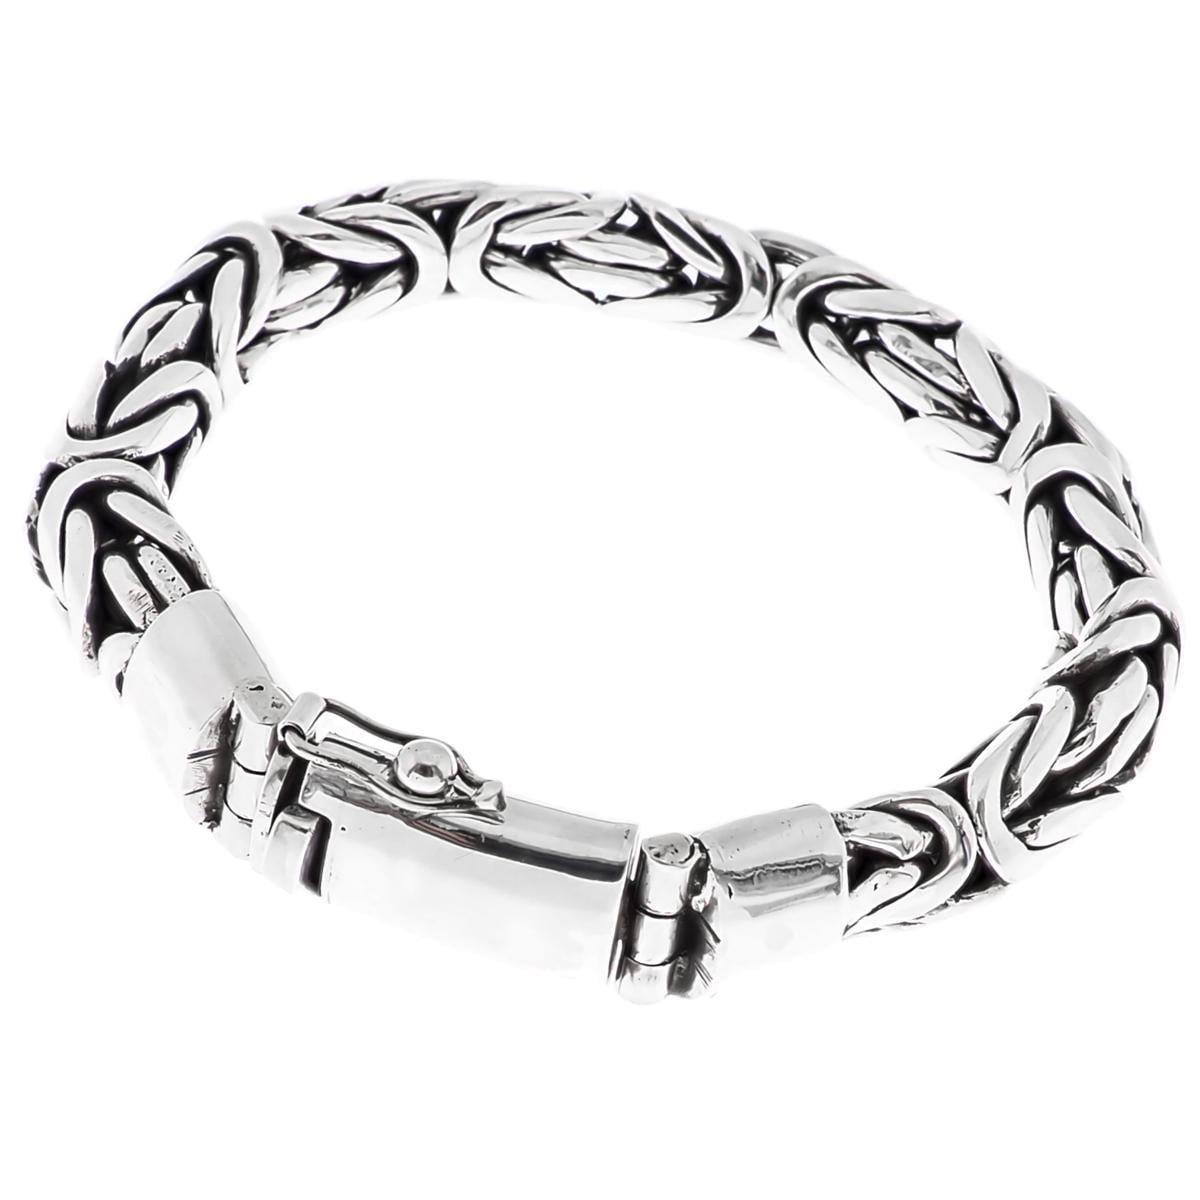 Handmade Jewelry Spiral Shape Chain Delicate Bracelet Sterling Silver Overlay 7-9 Long